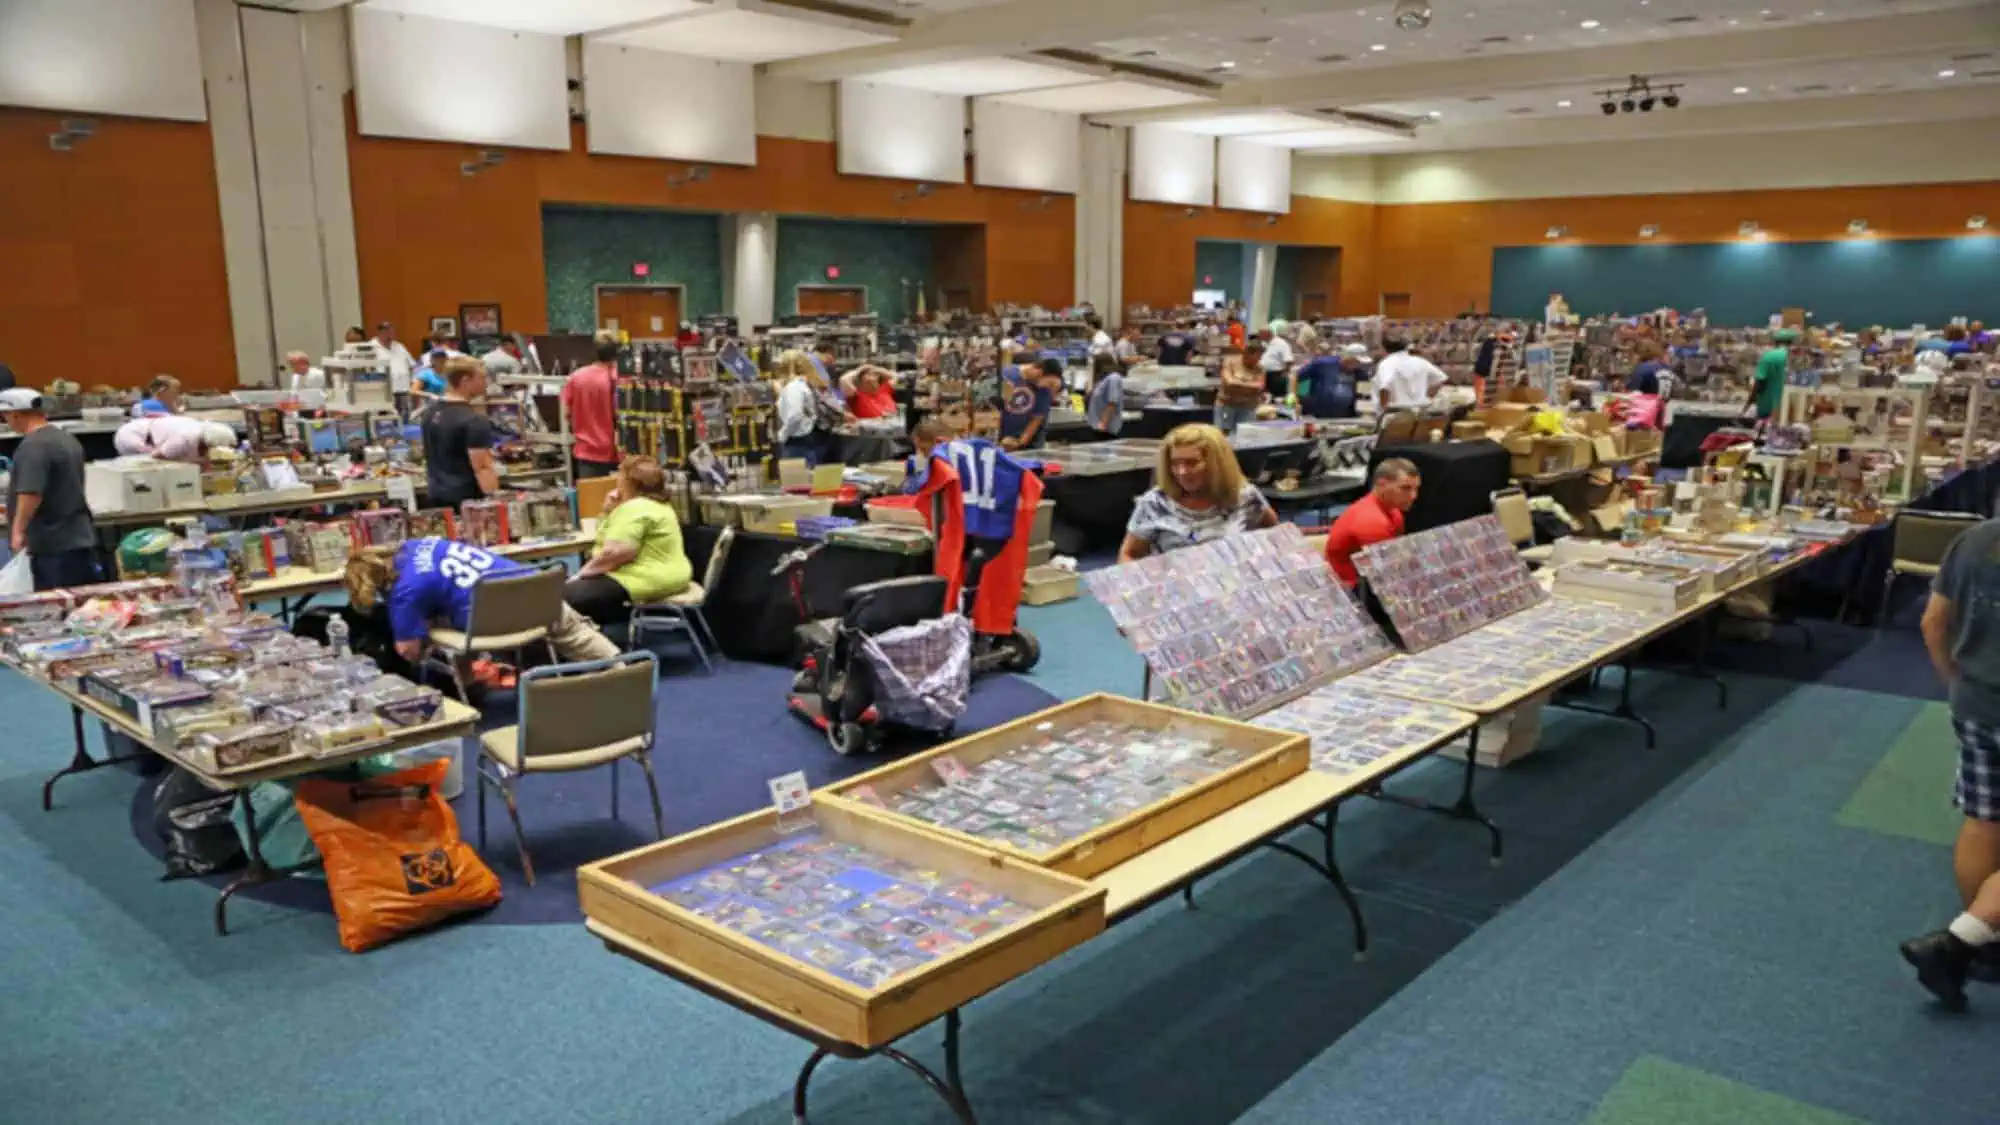 People investing in collectibles at a trade show buying and selling Pokemon cards, comic books, sports cards and more.